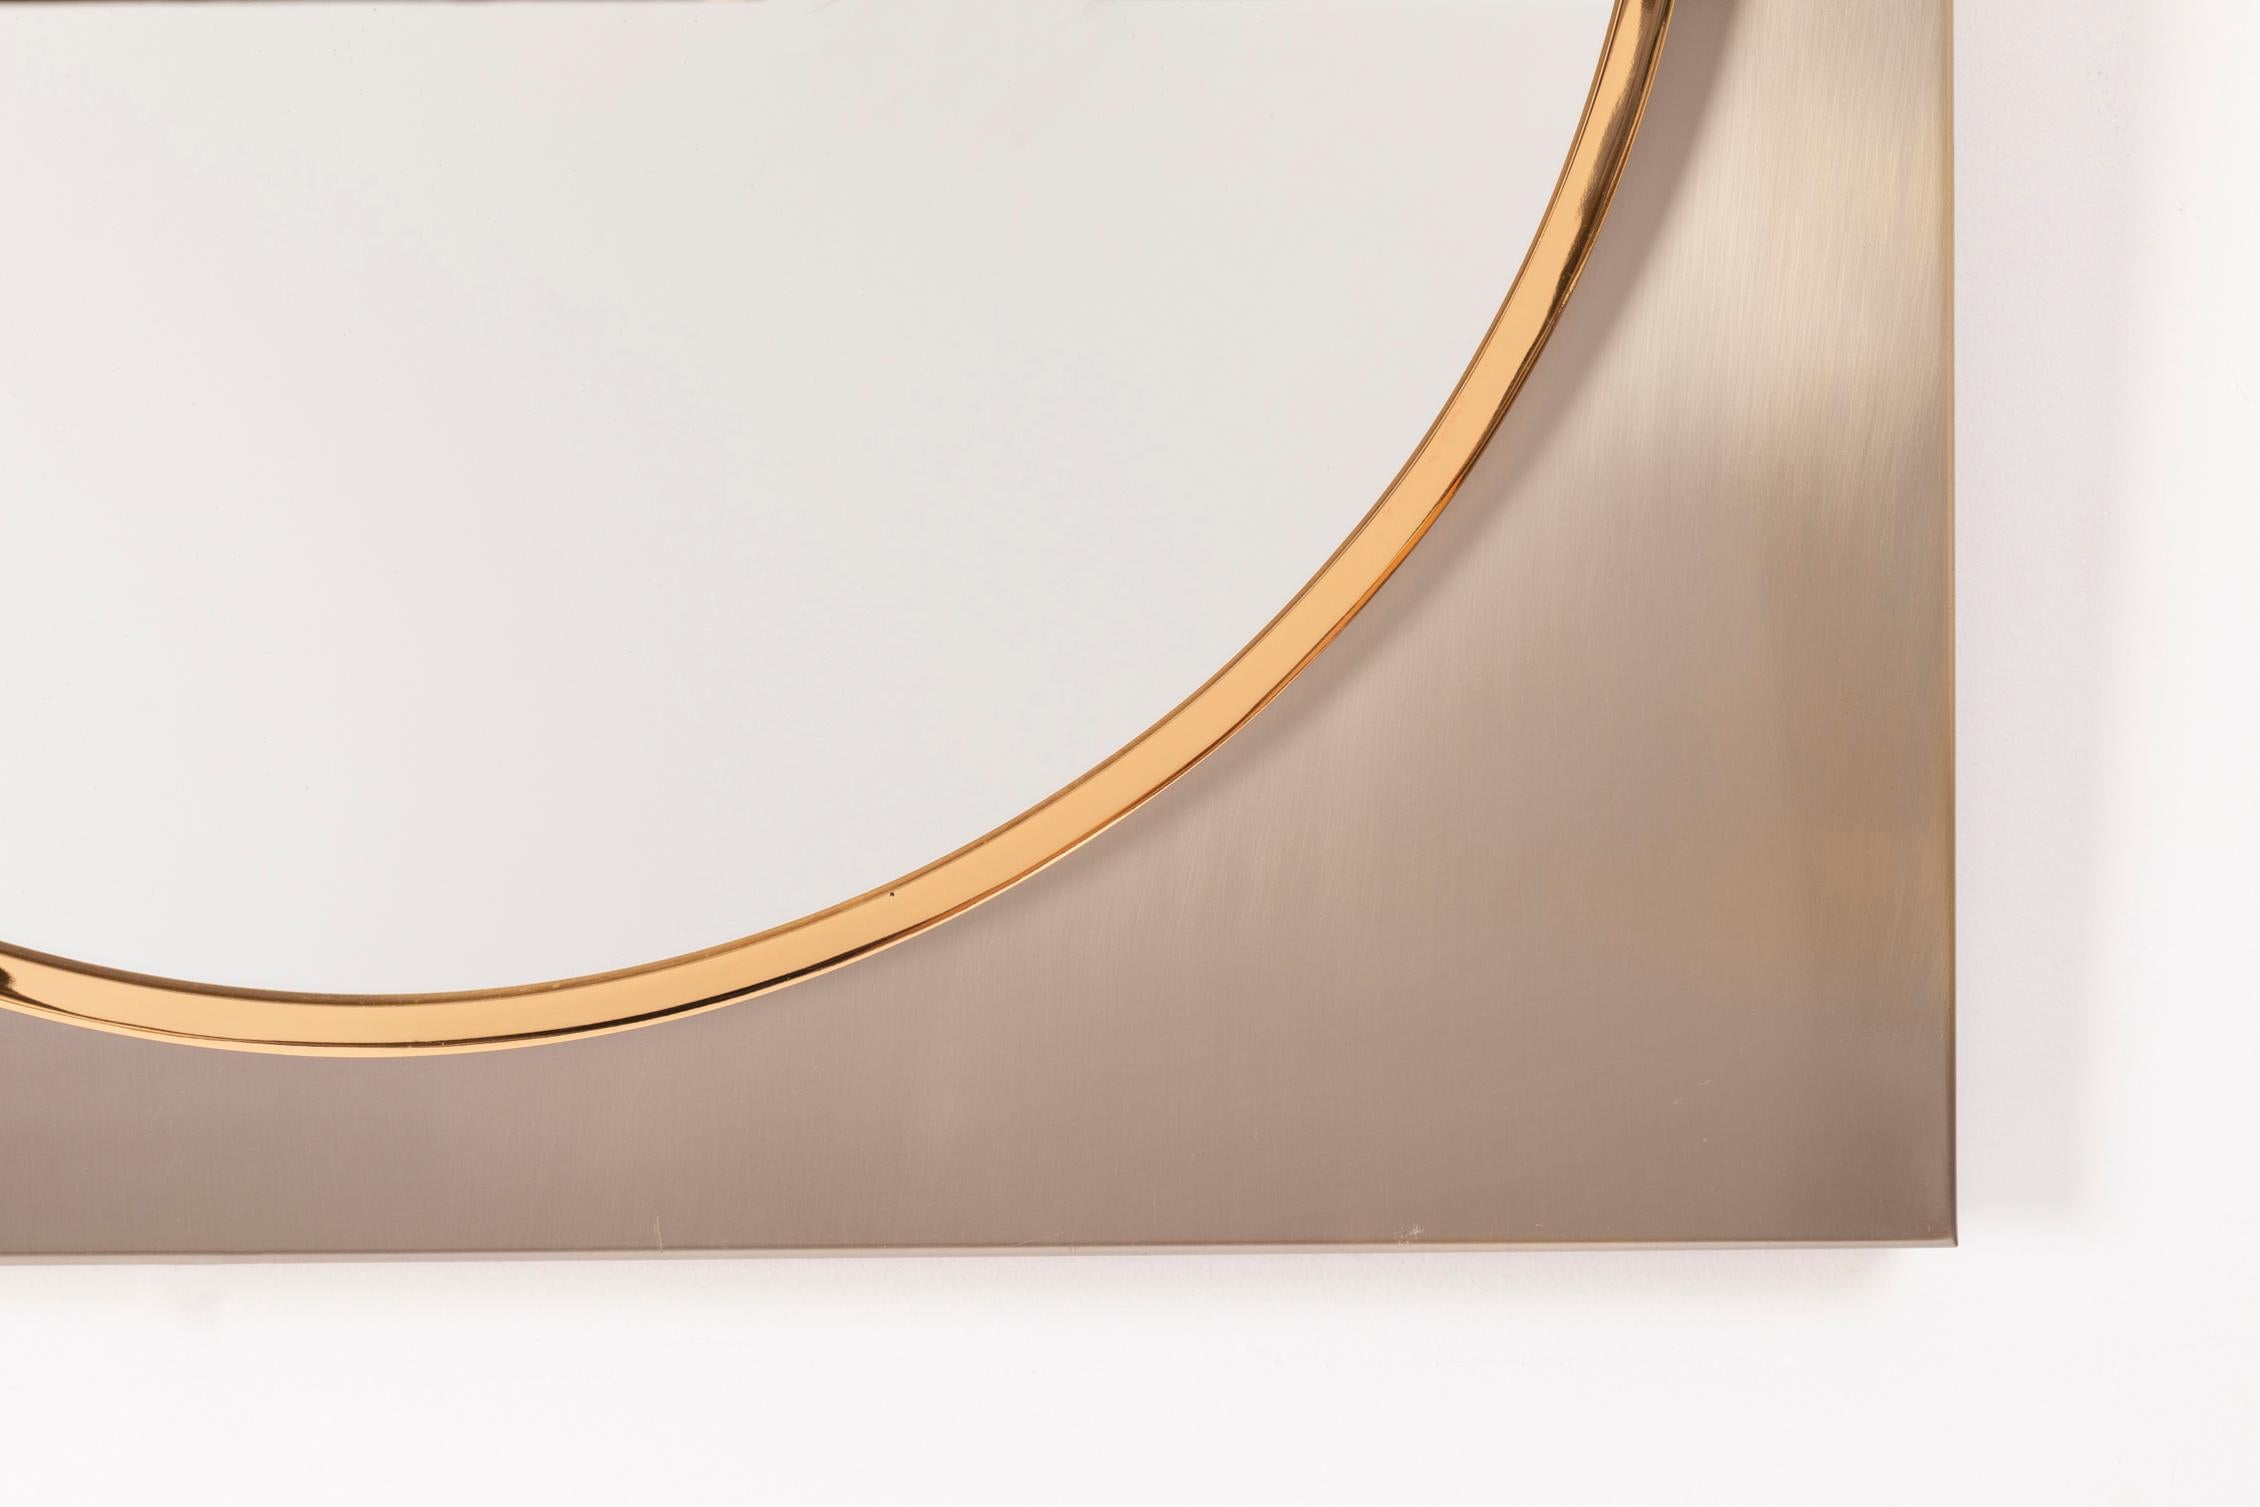 Late 20th Century Square Brushed Steel and Brass Mirror, 1970s